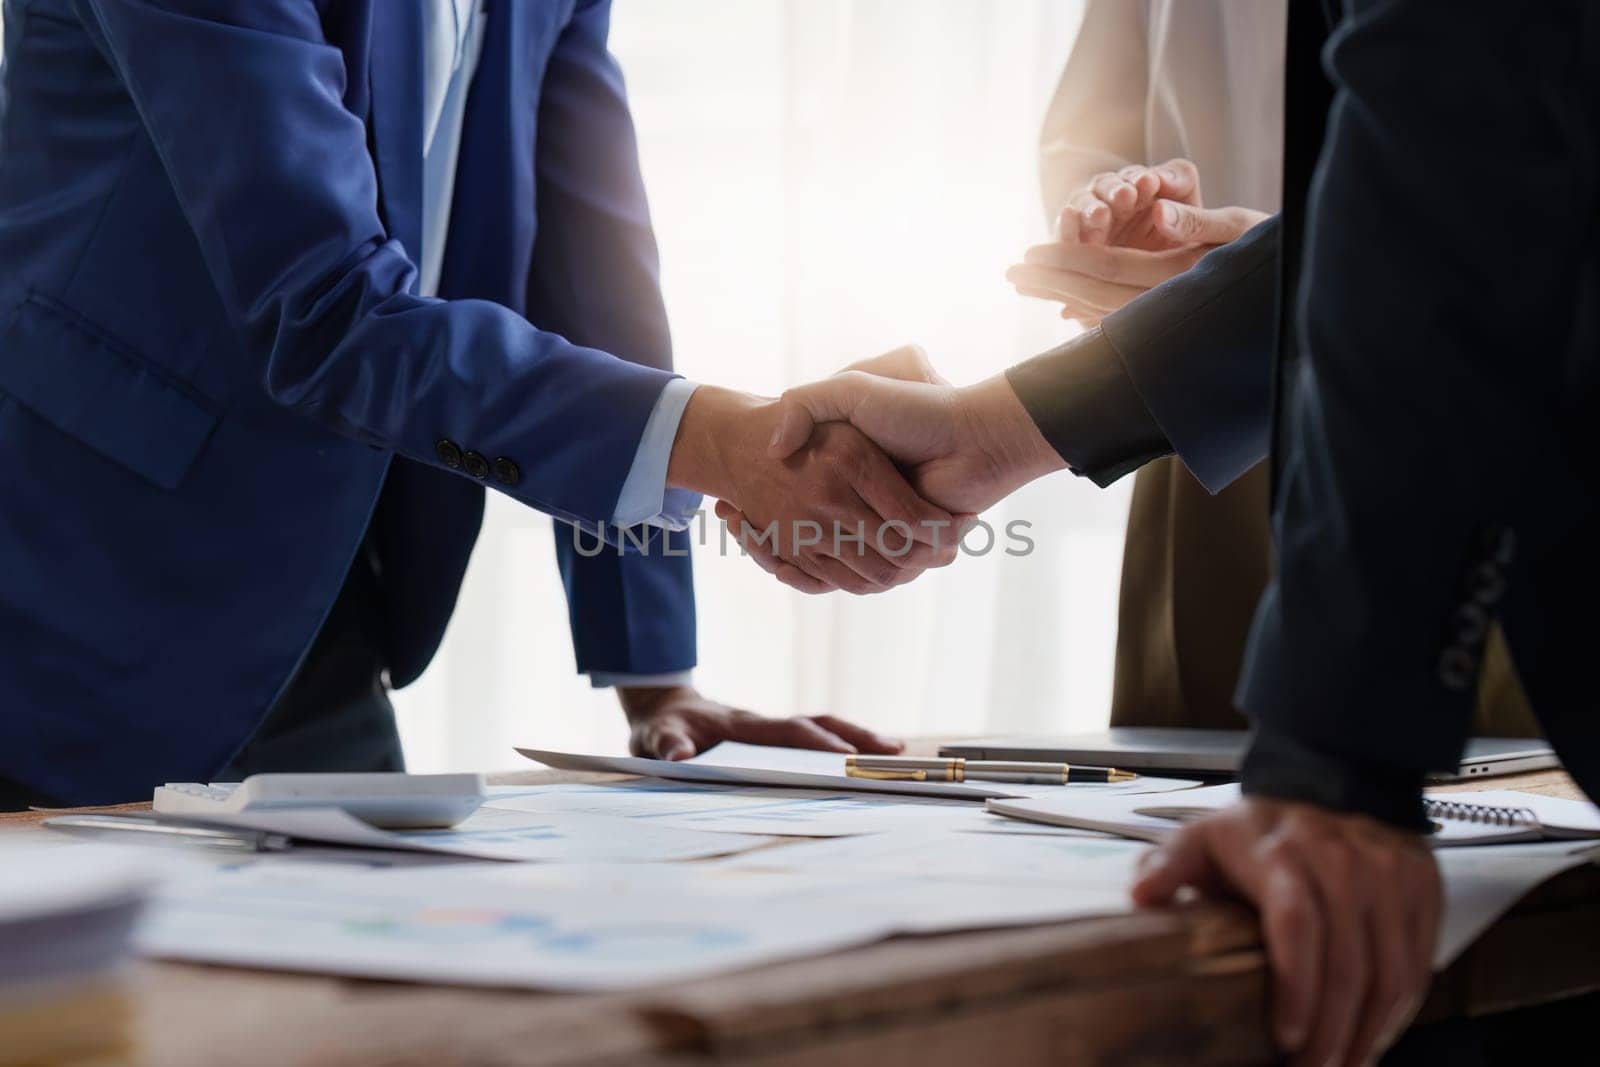 Business people handshake. Successful businessmen handshaking after good deal. Finishing up meeting concept by itchaznong